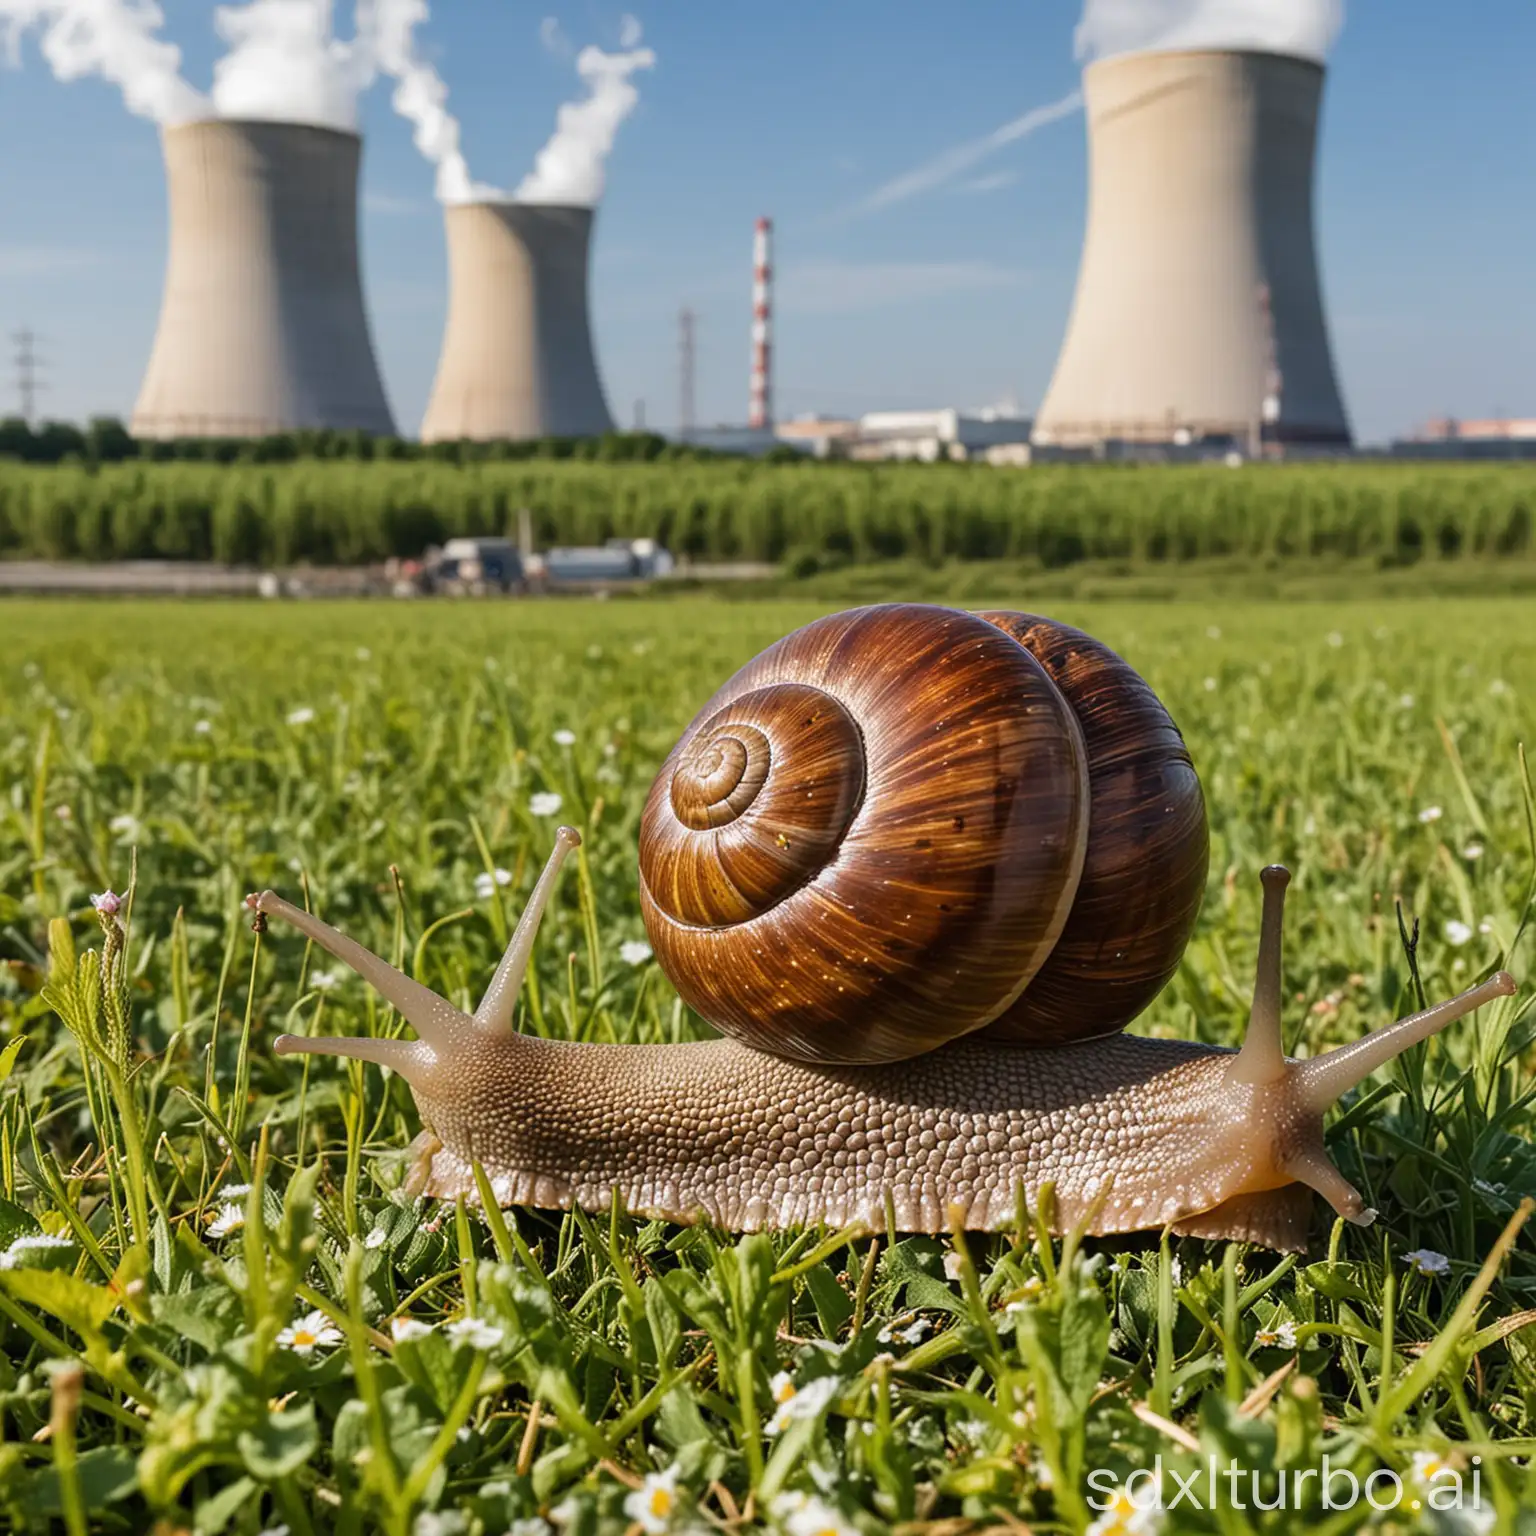 Giant-Mutated-Vineyard-Snail-Roaming-Meadow-with-Nuclear-Power-Plant-Background